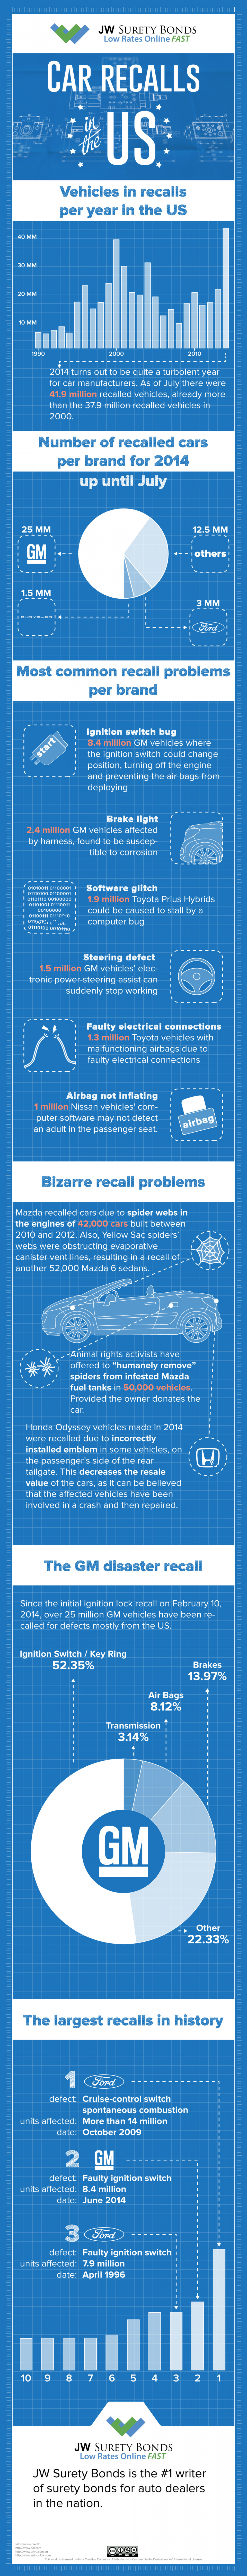 Car Recalls in the USA Infographic